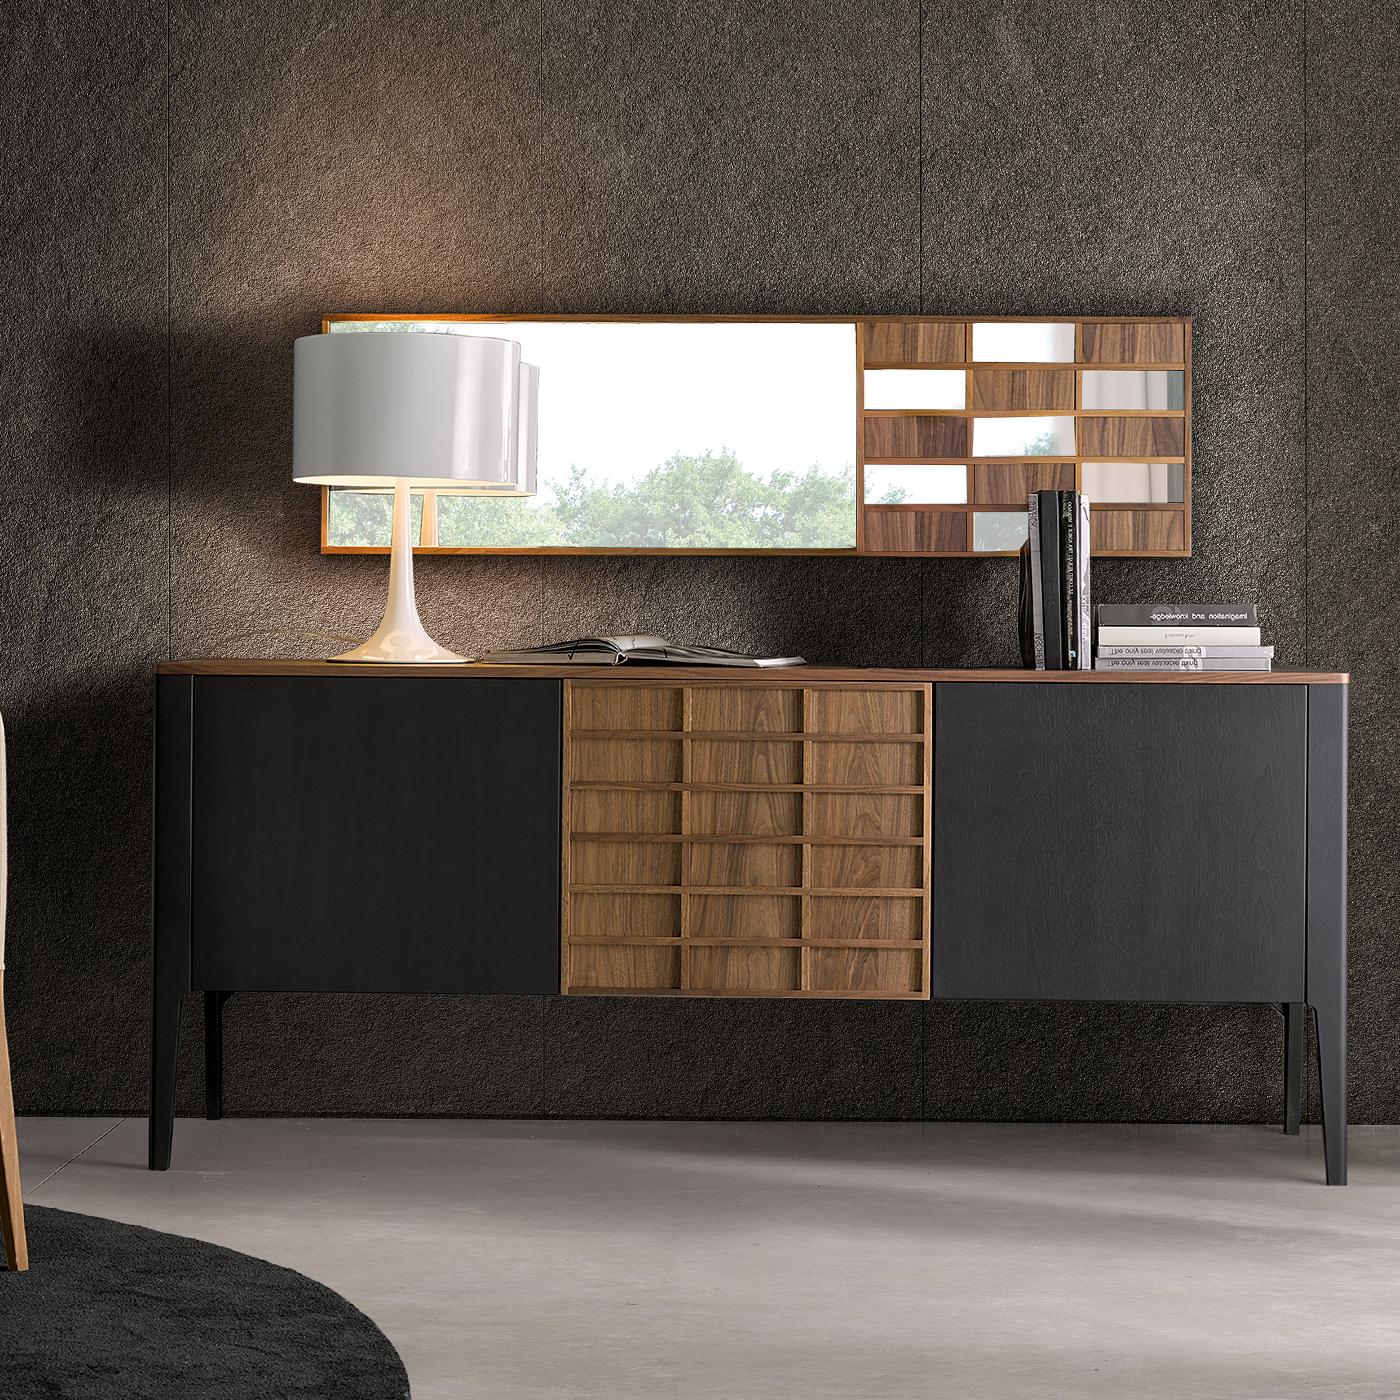 This sideboard features 3 wooden doors in an anthracite finish with 3 glass shelves. The opening has integrated wooden handles and push-pull mechanism in Havana finish.